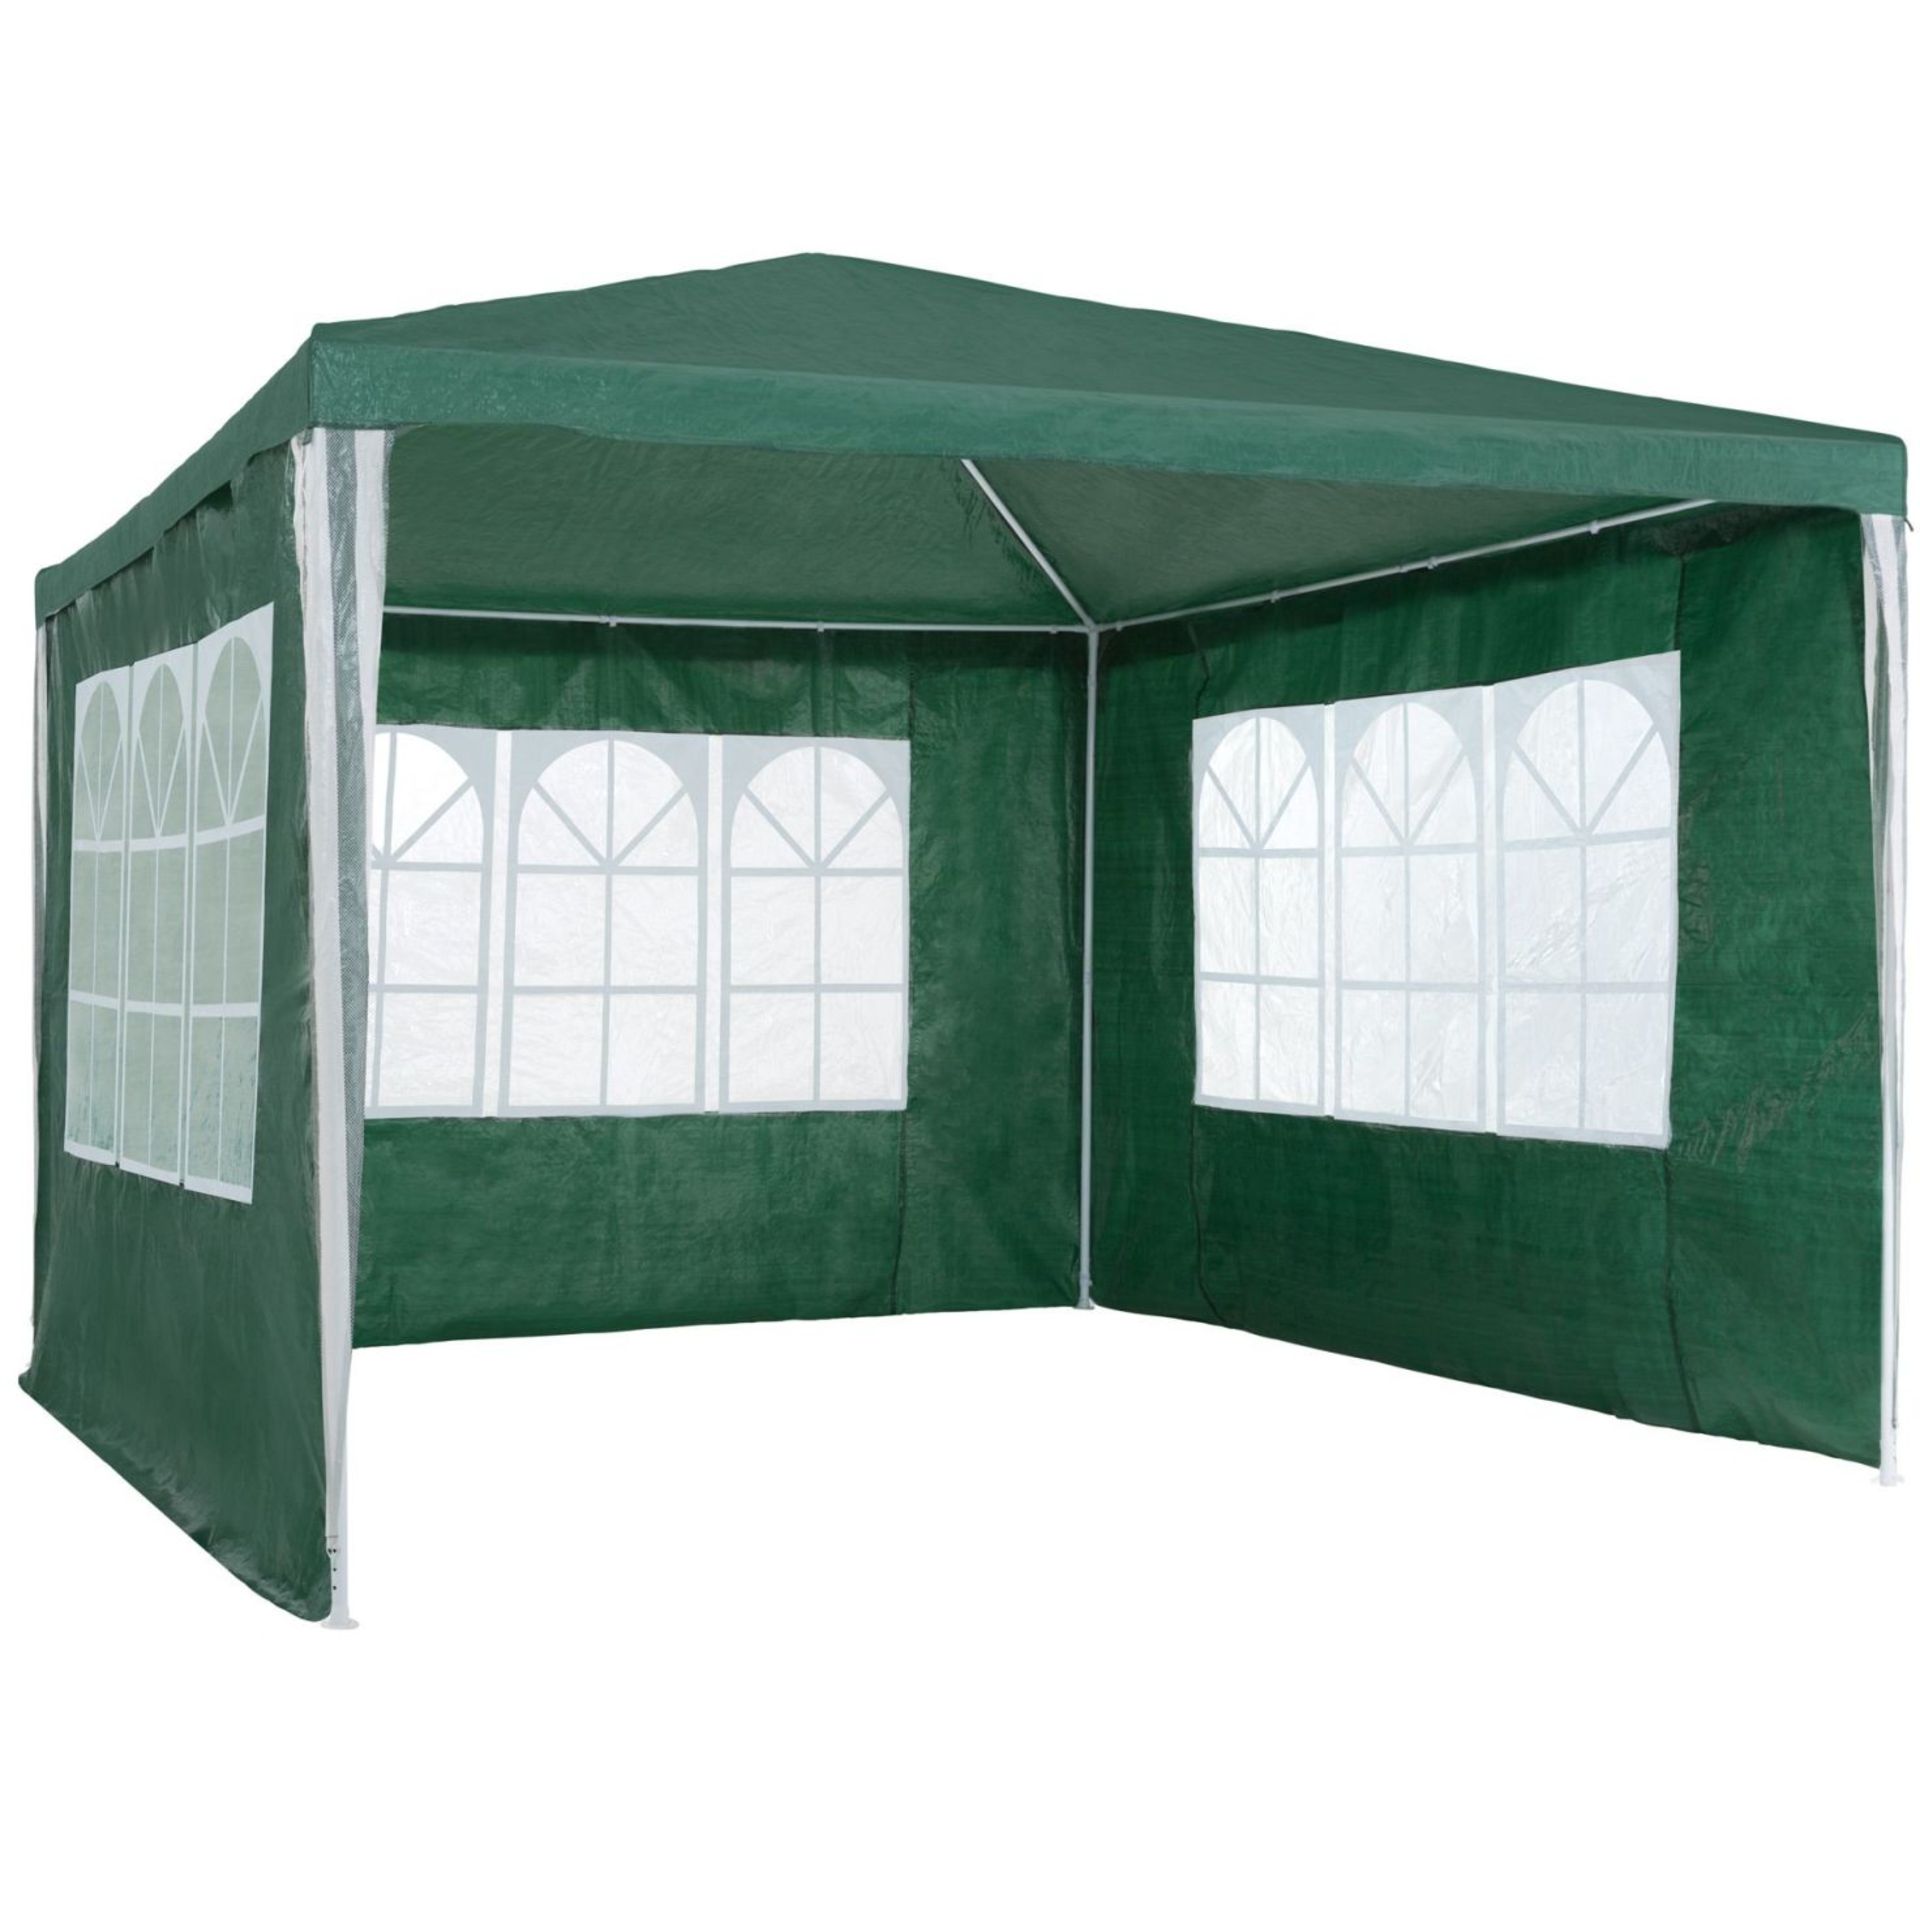 Tectake - Gazebo 3X3M With 3 Side Panels Green - Boxed. RRP £71.99 - Image 2 of 2